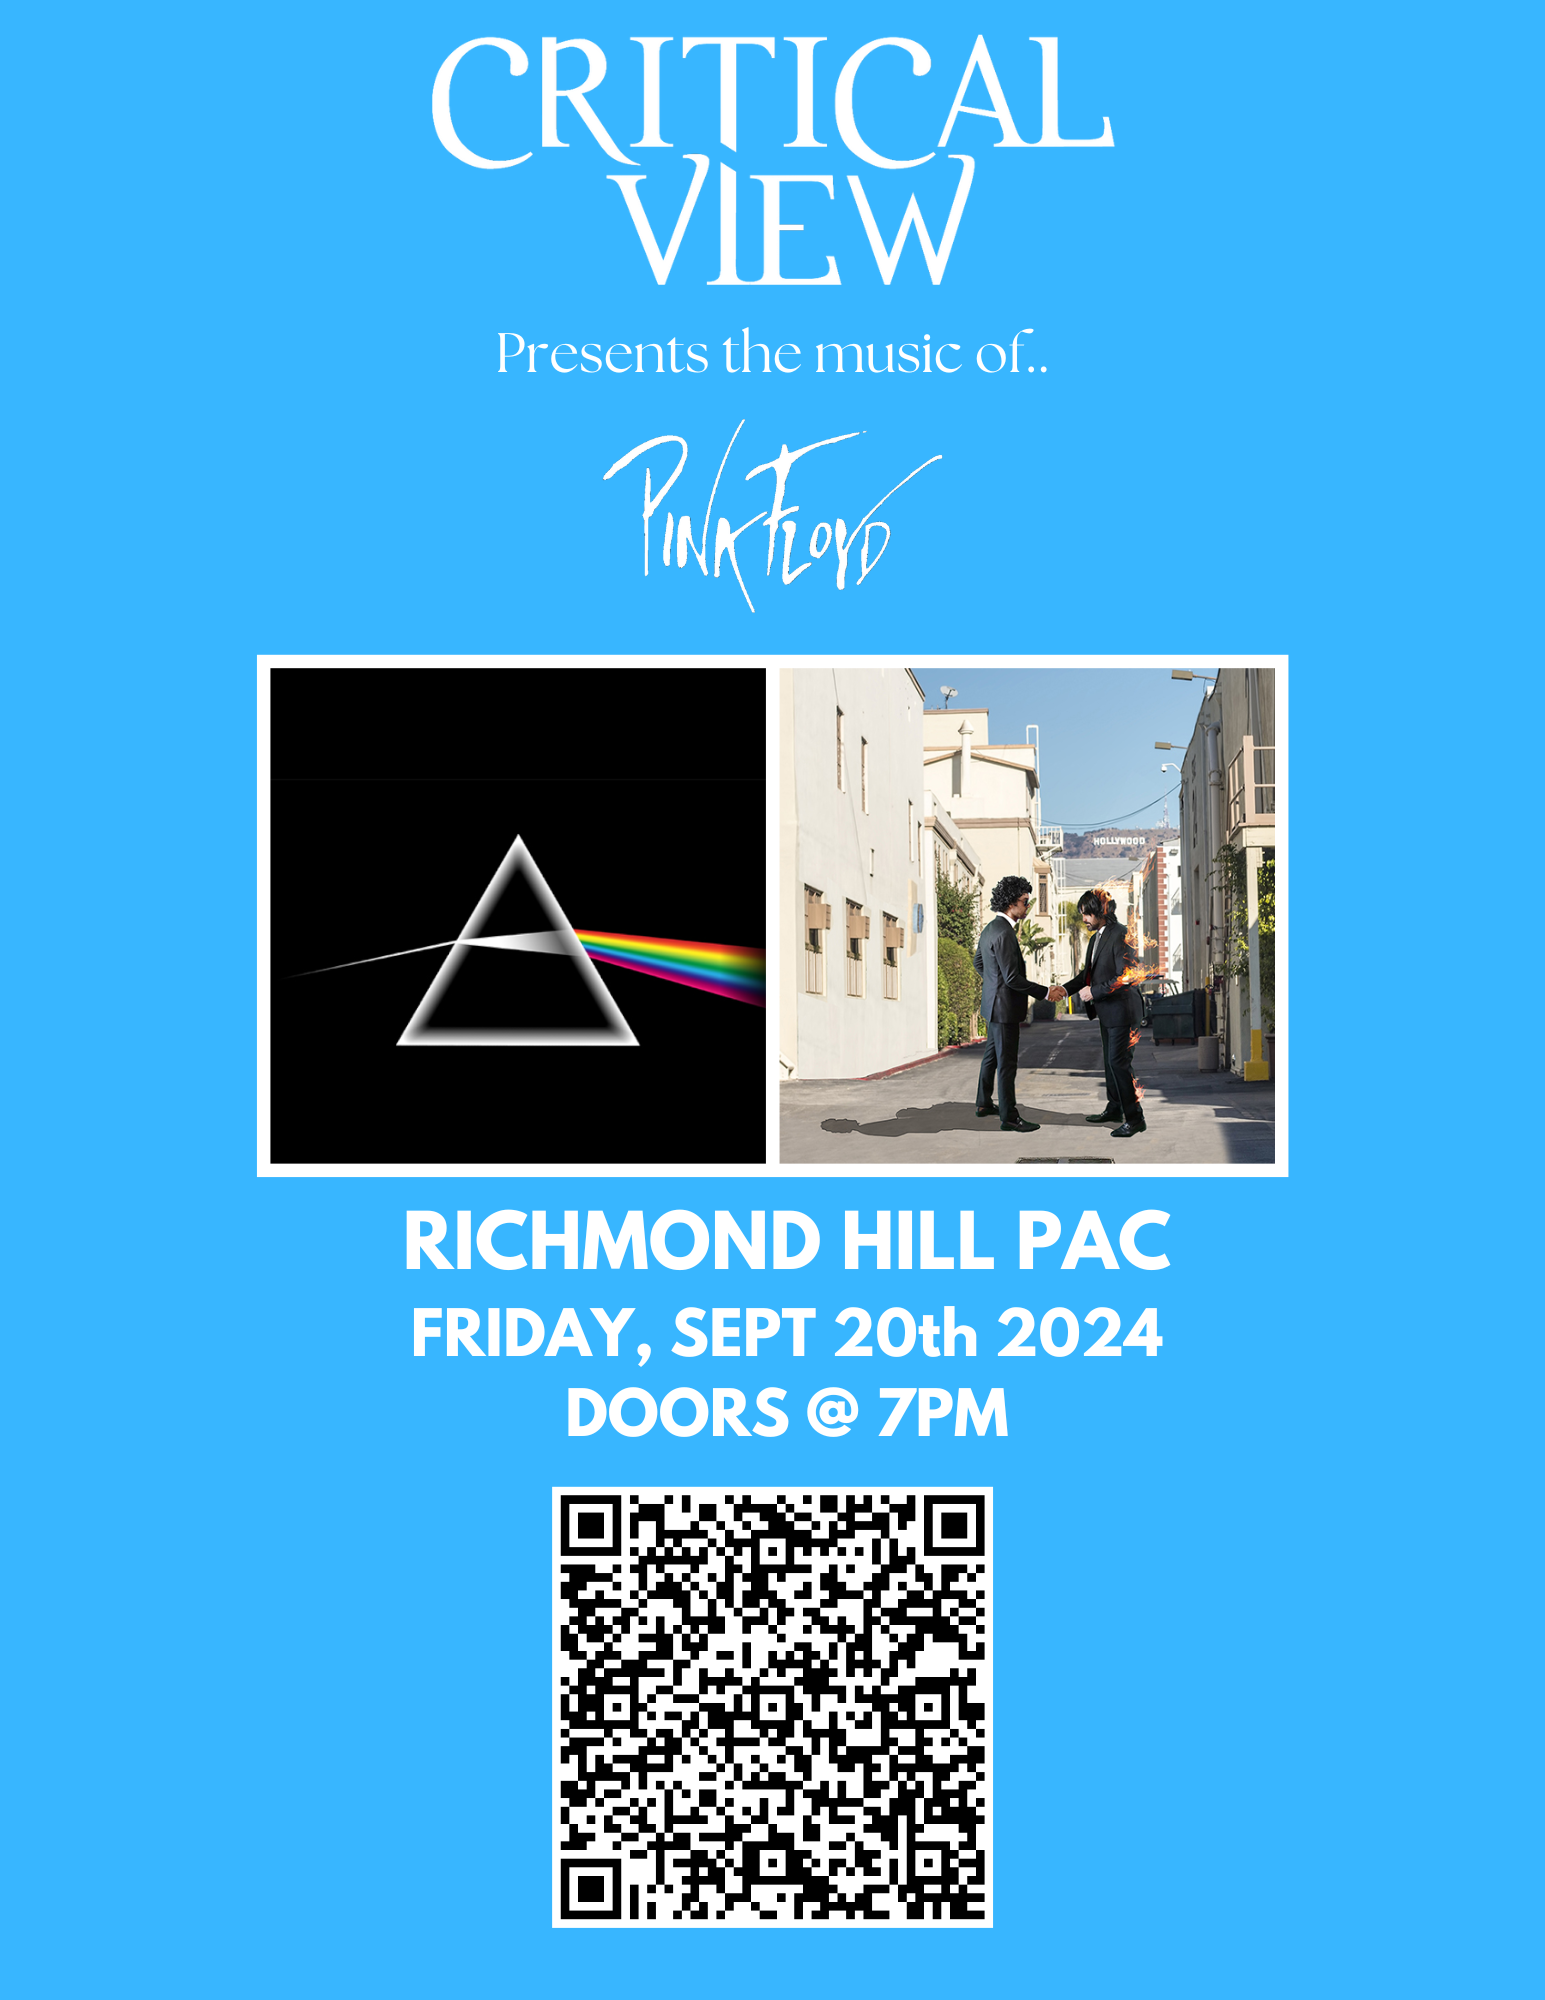 poster for lindsay flat theatre critical view concert